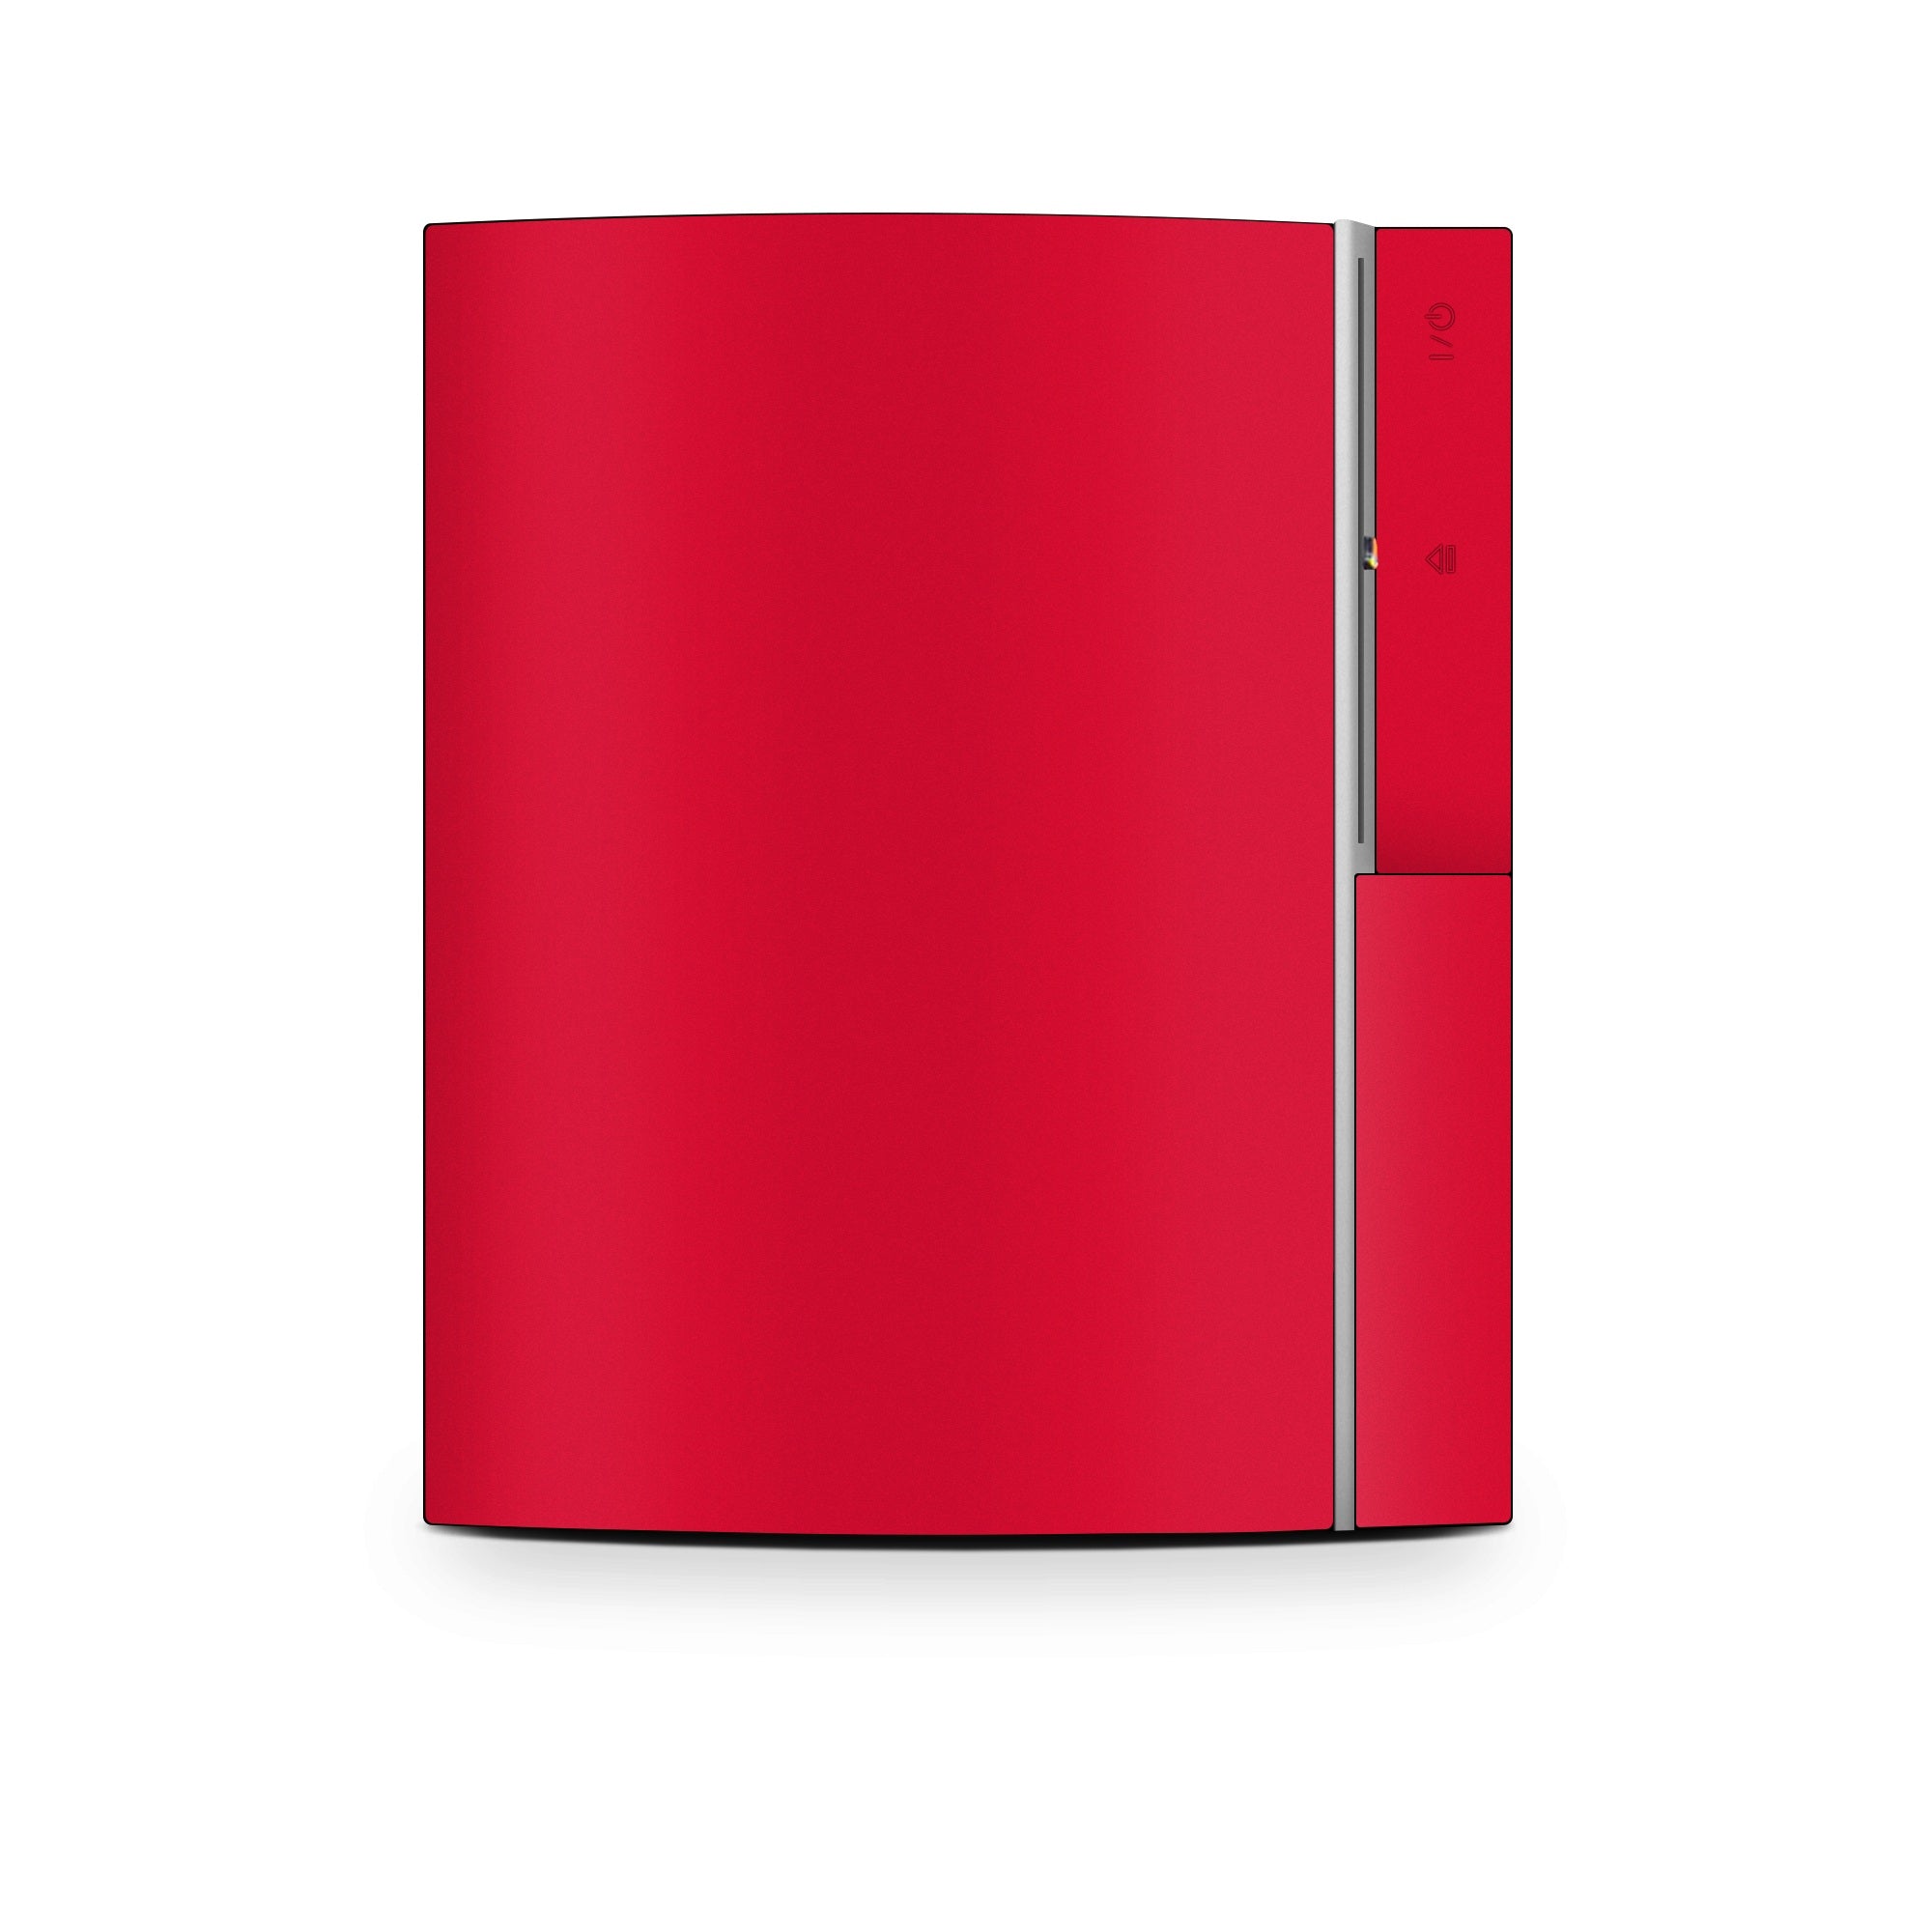 Solid State Red - Sony PS3 Skin